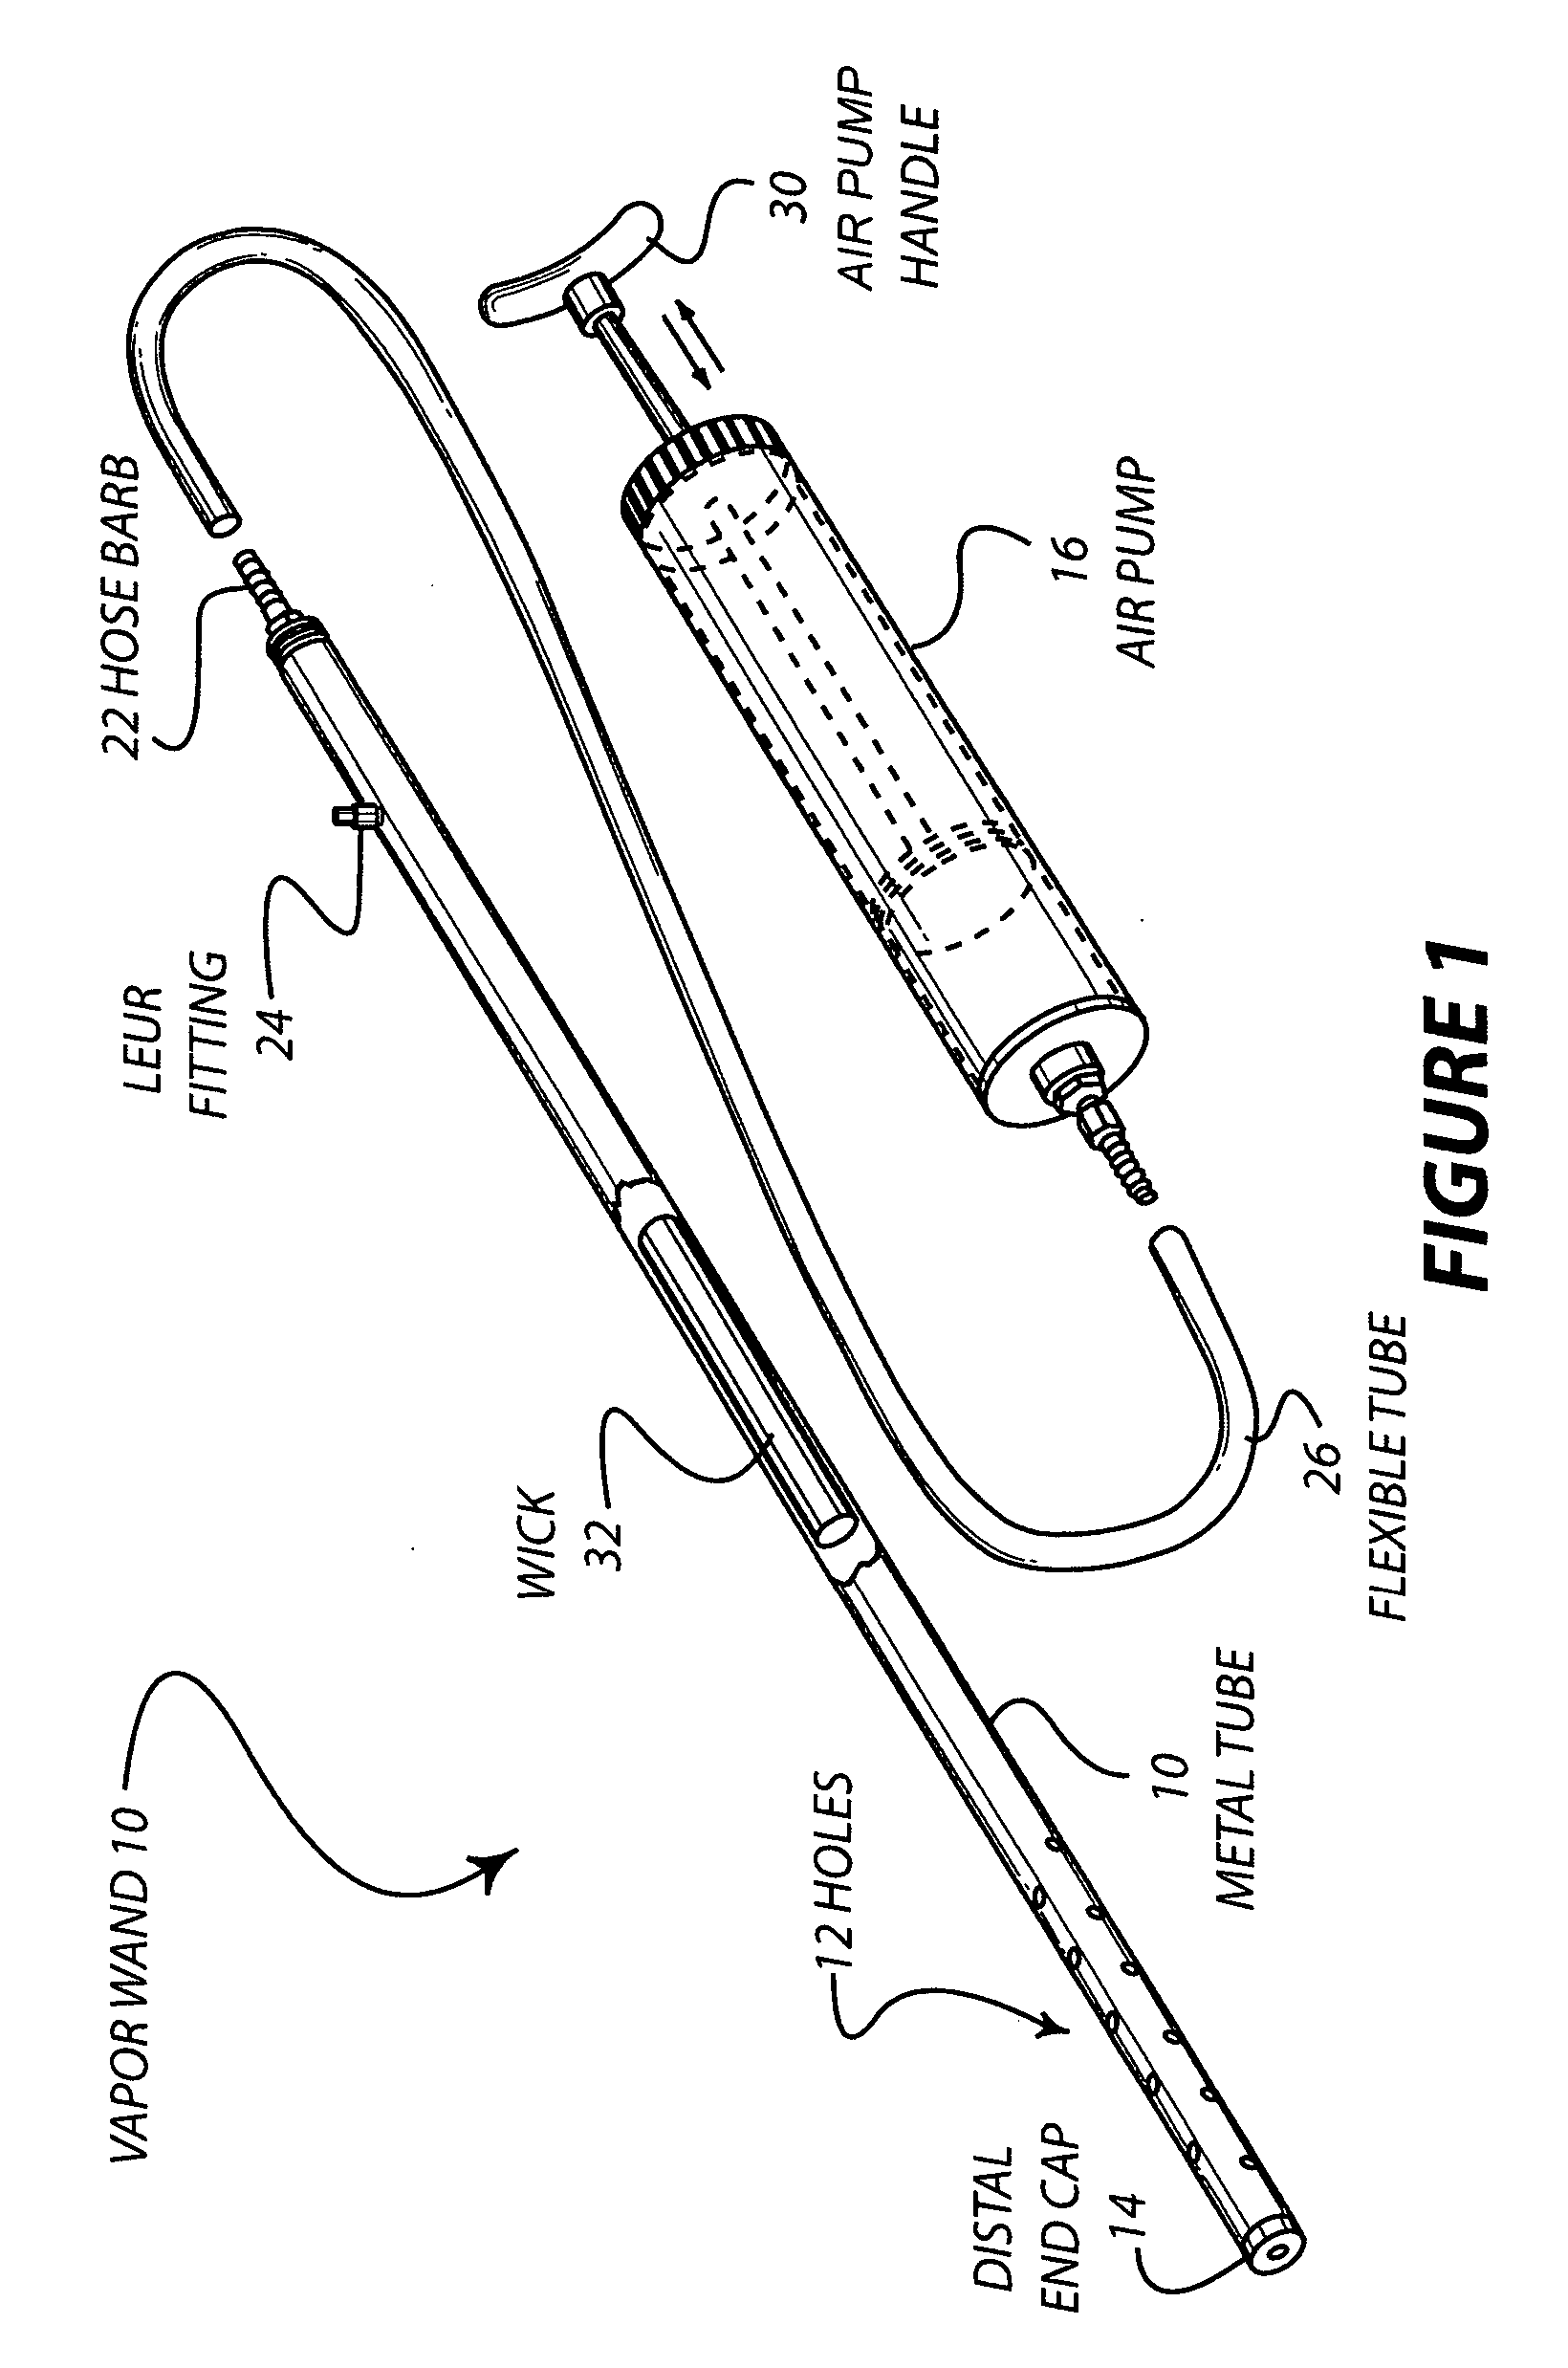 Anesthetic delivery device